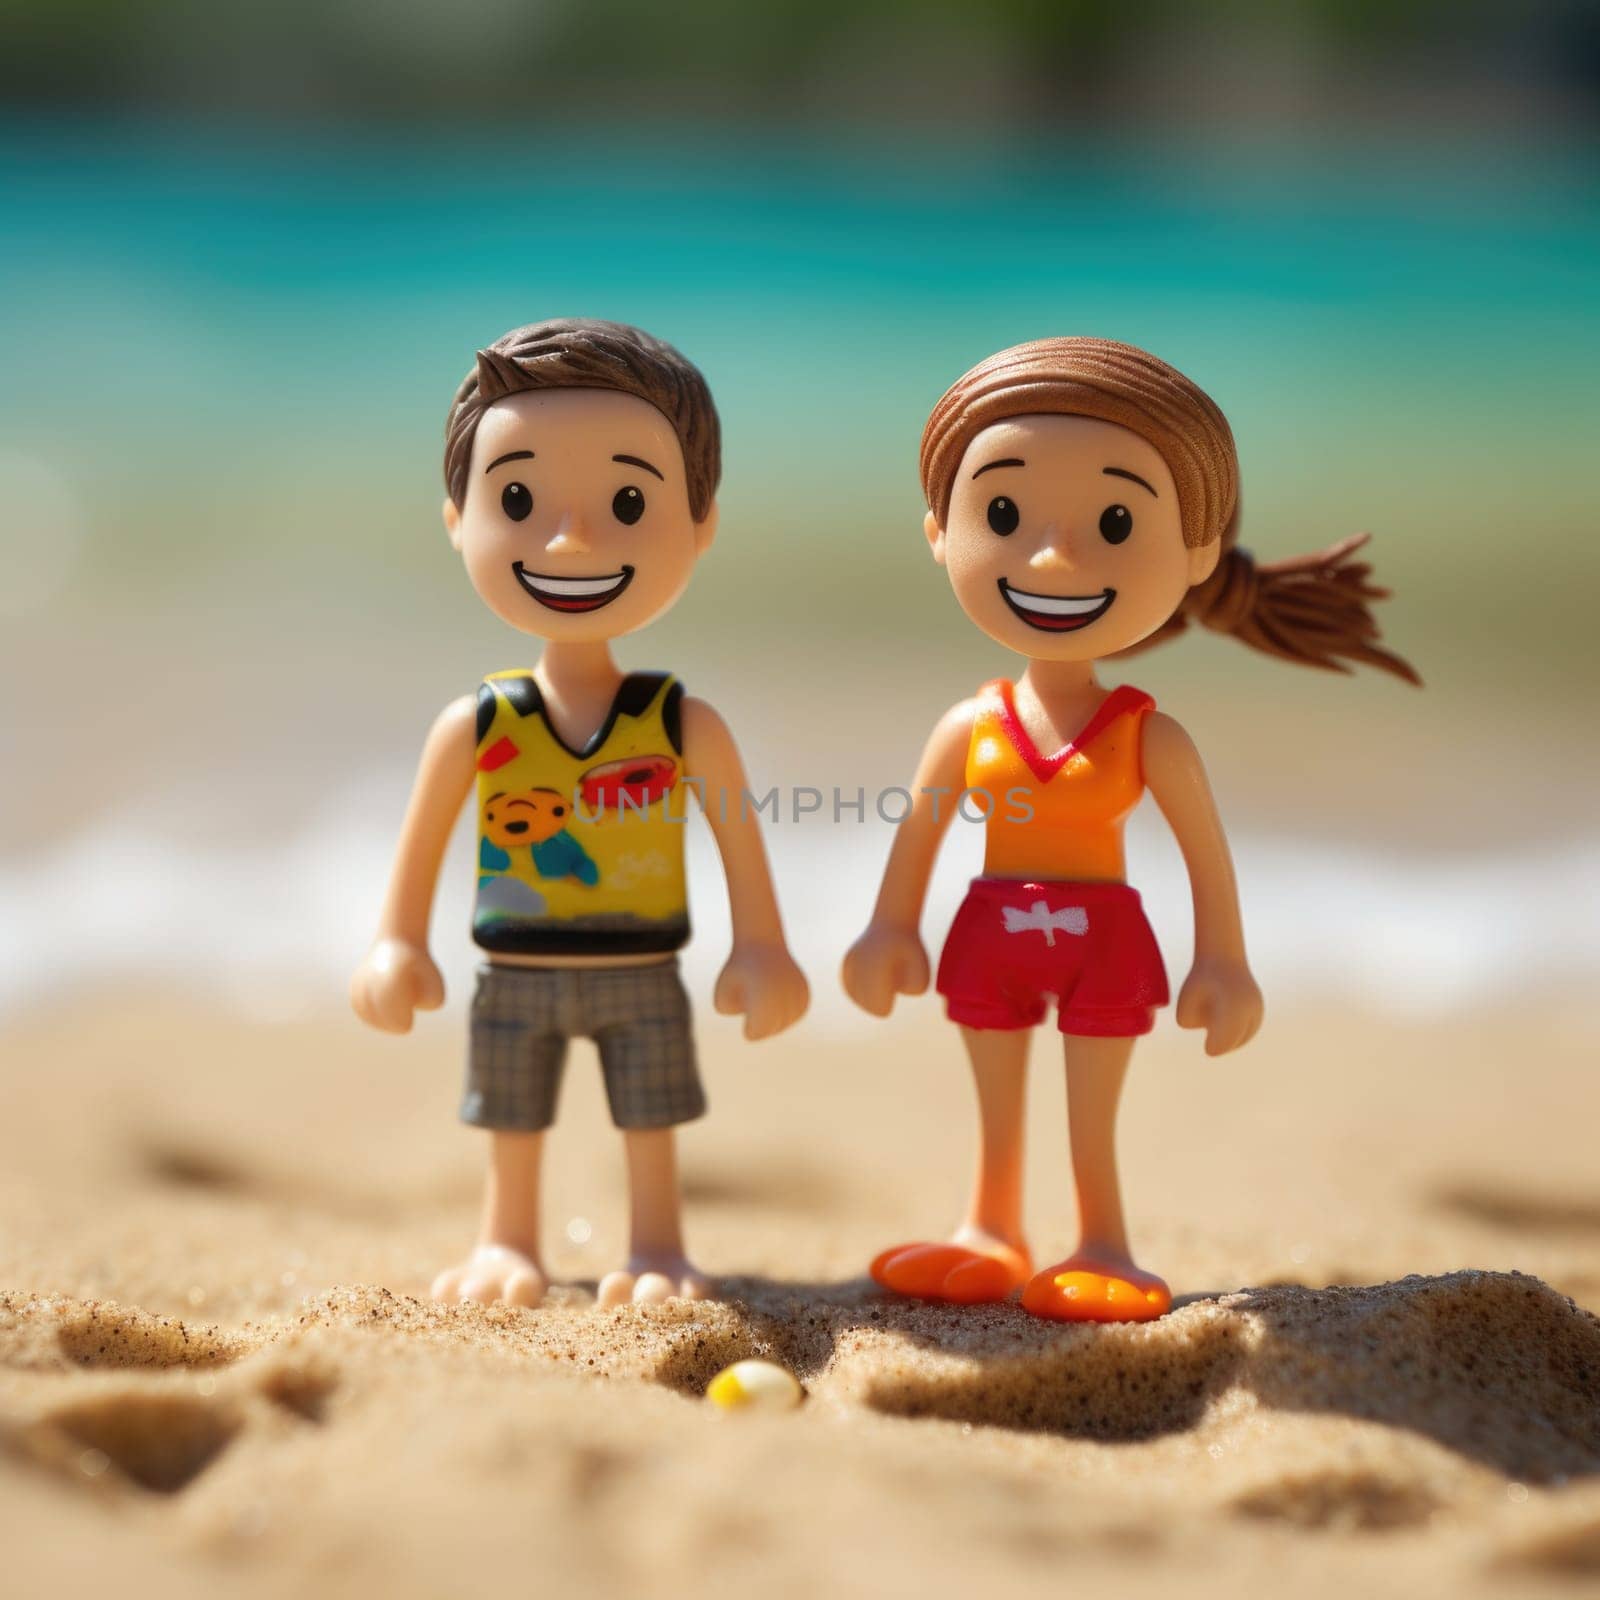 A couple of toy people standing on a beach, AI by starush